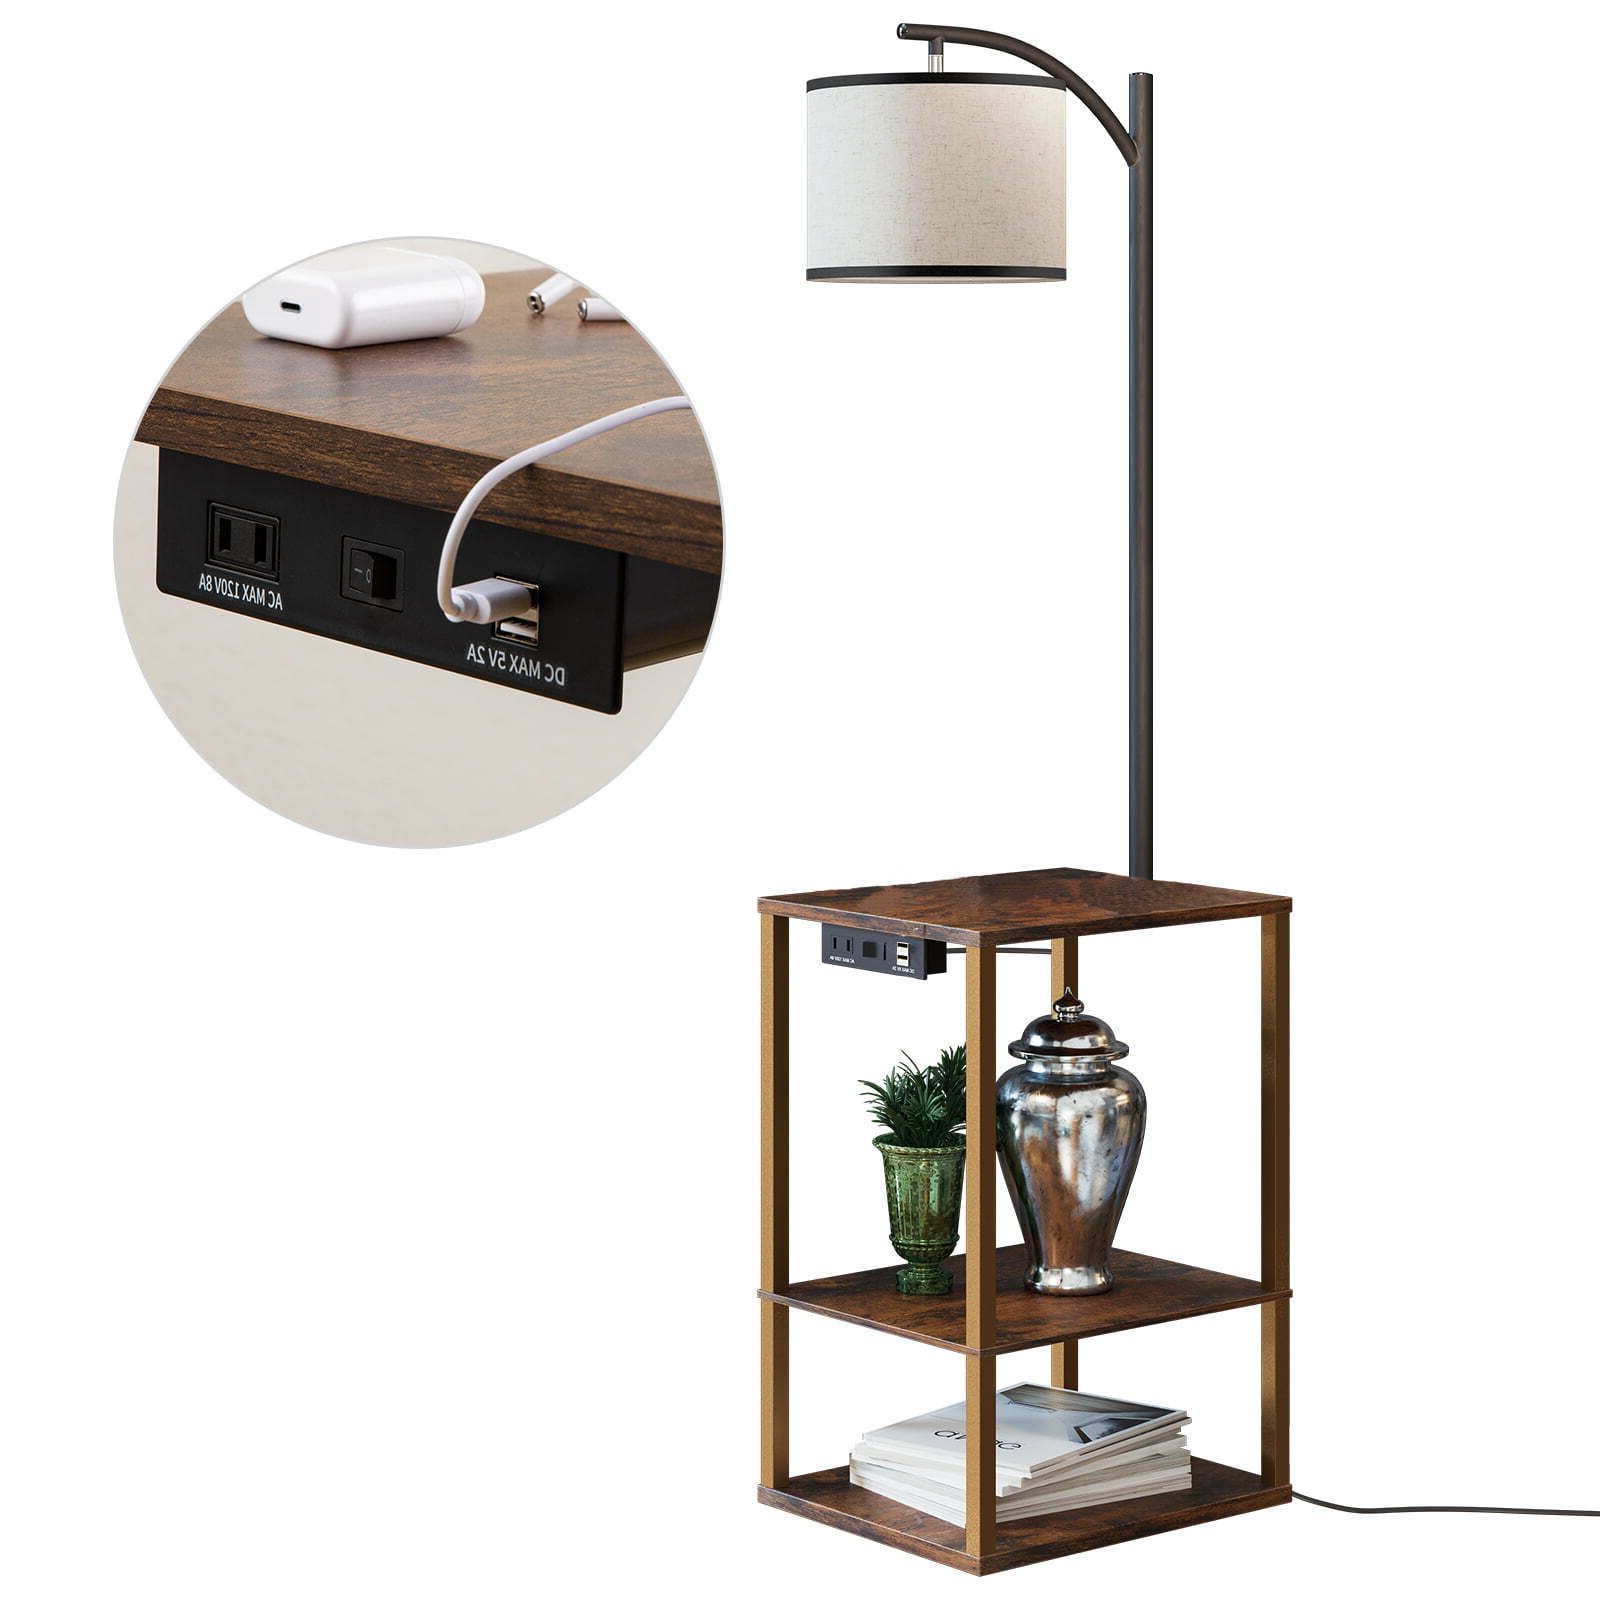 Floor Lamp With Table, Lamps For Living Room With Usb Port, End Table Brown  | Ebay In Floor Lamps With Usb (View 14 of 20)